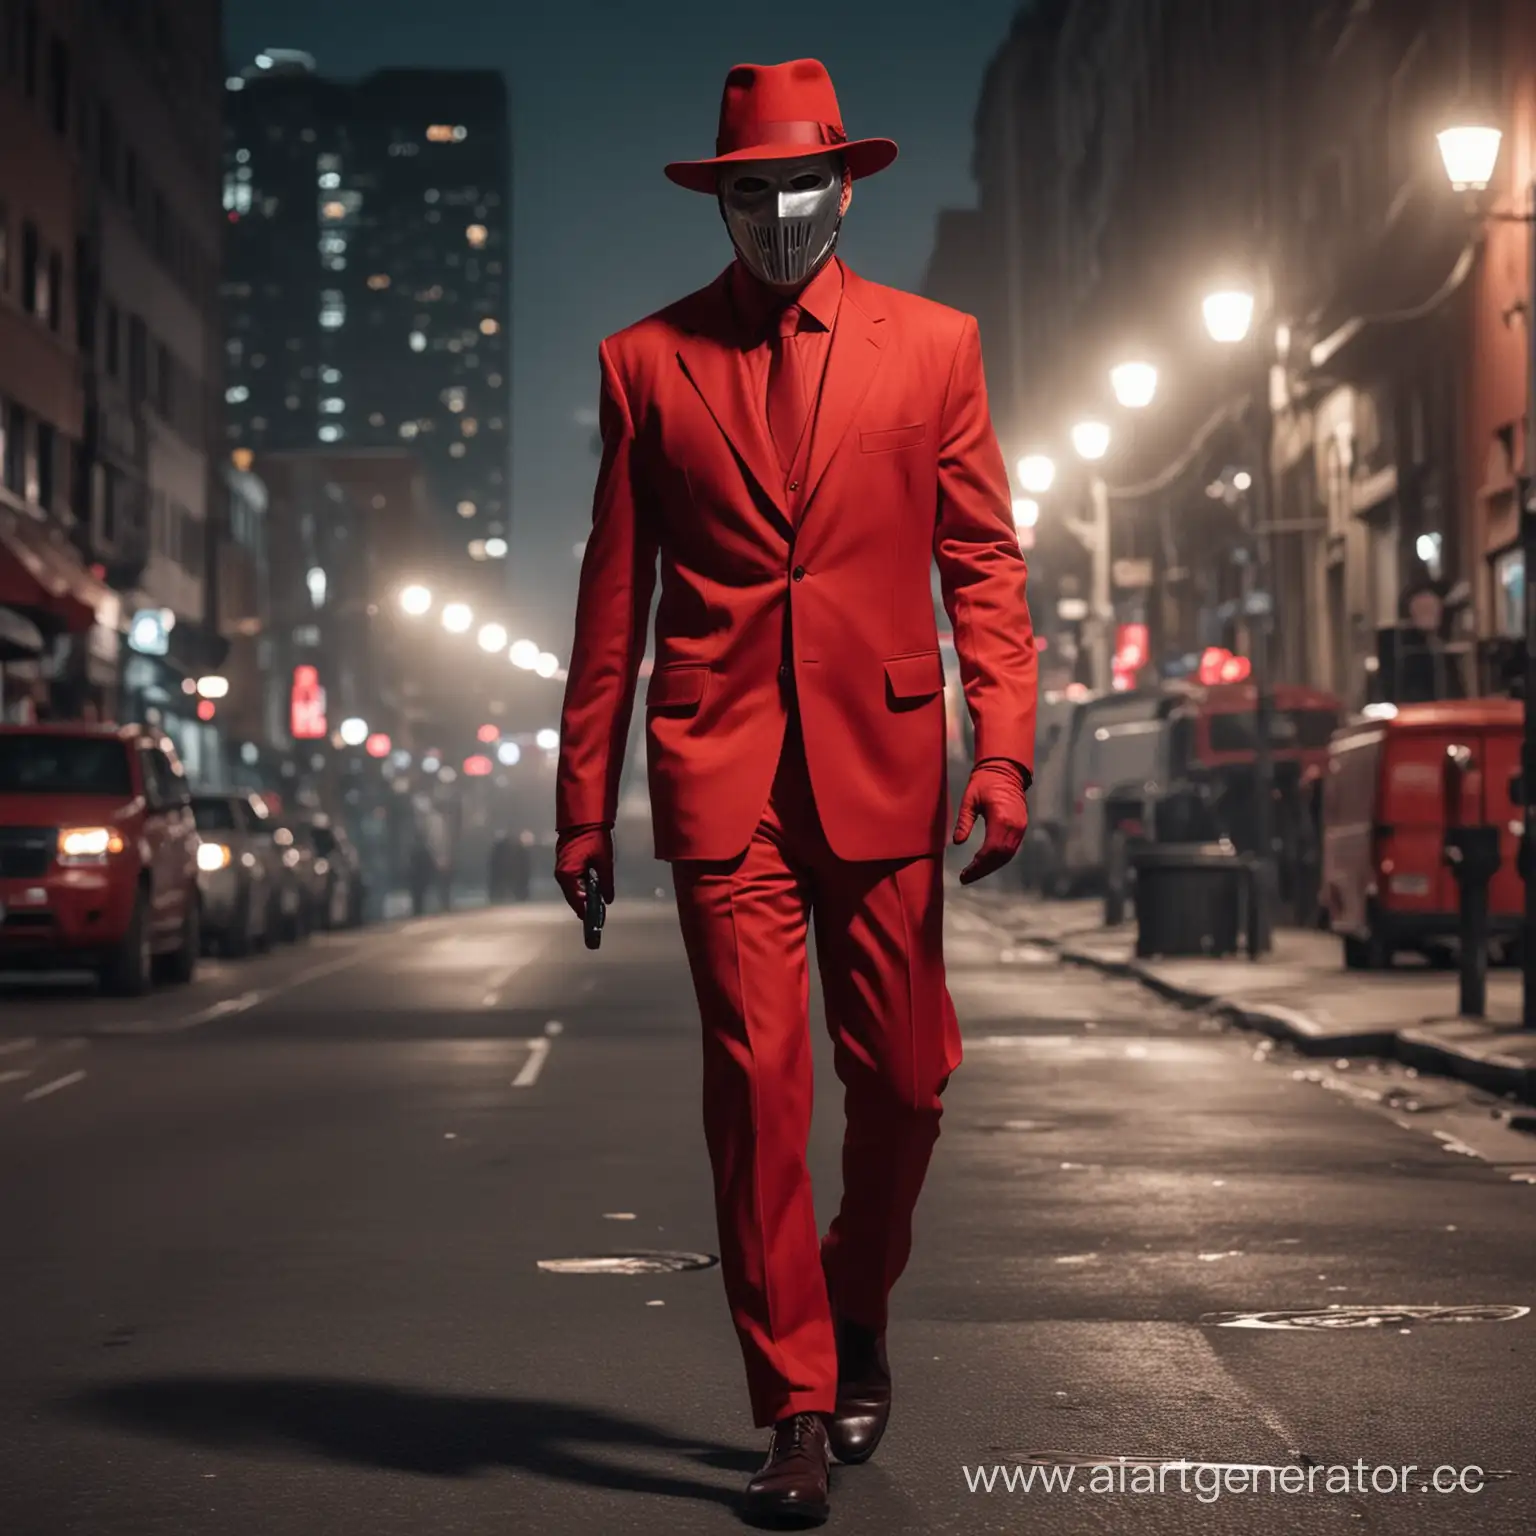 Mysterious-Man-in-Crimson-Suit-and-Mask-Strolling-Through-Urban-Night